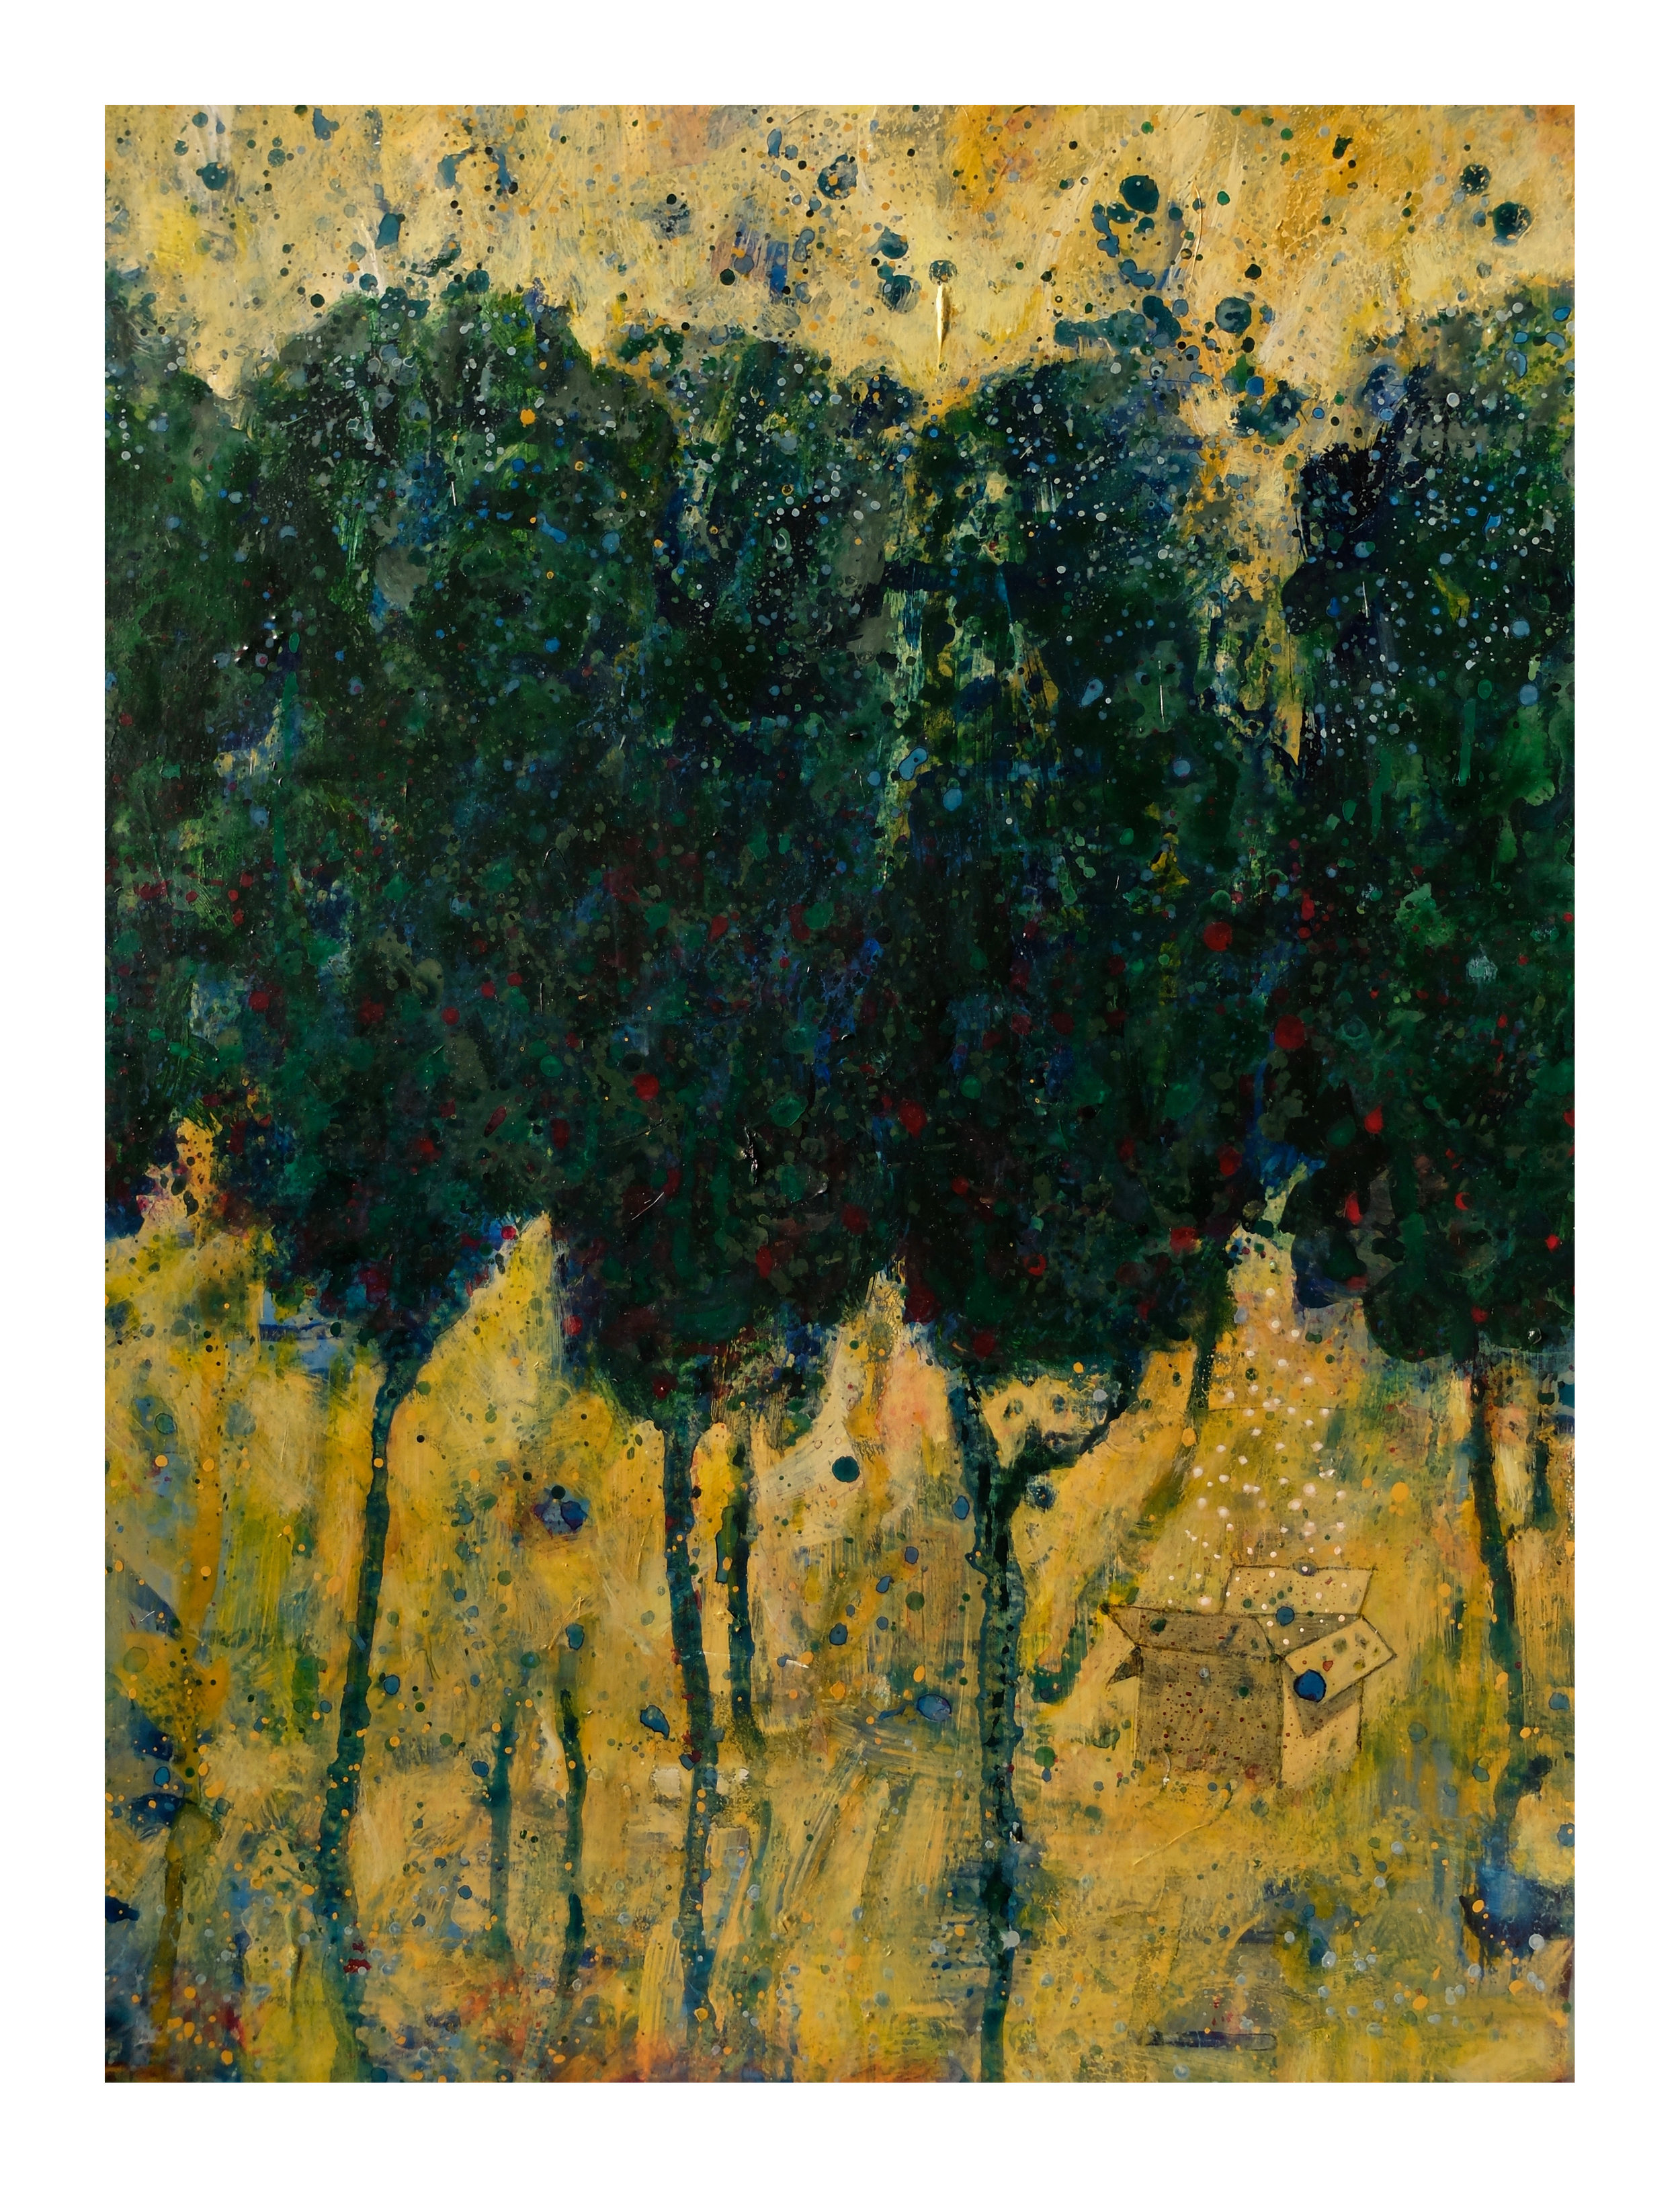 "Yellow forest"